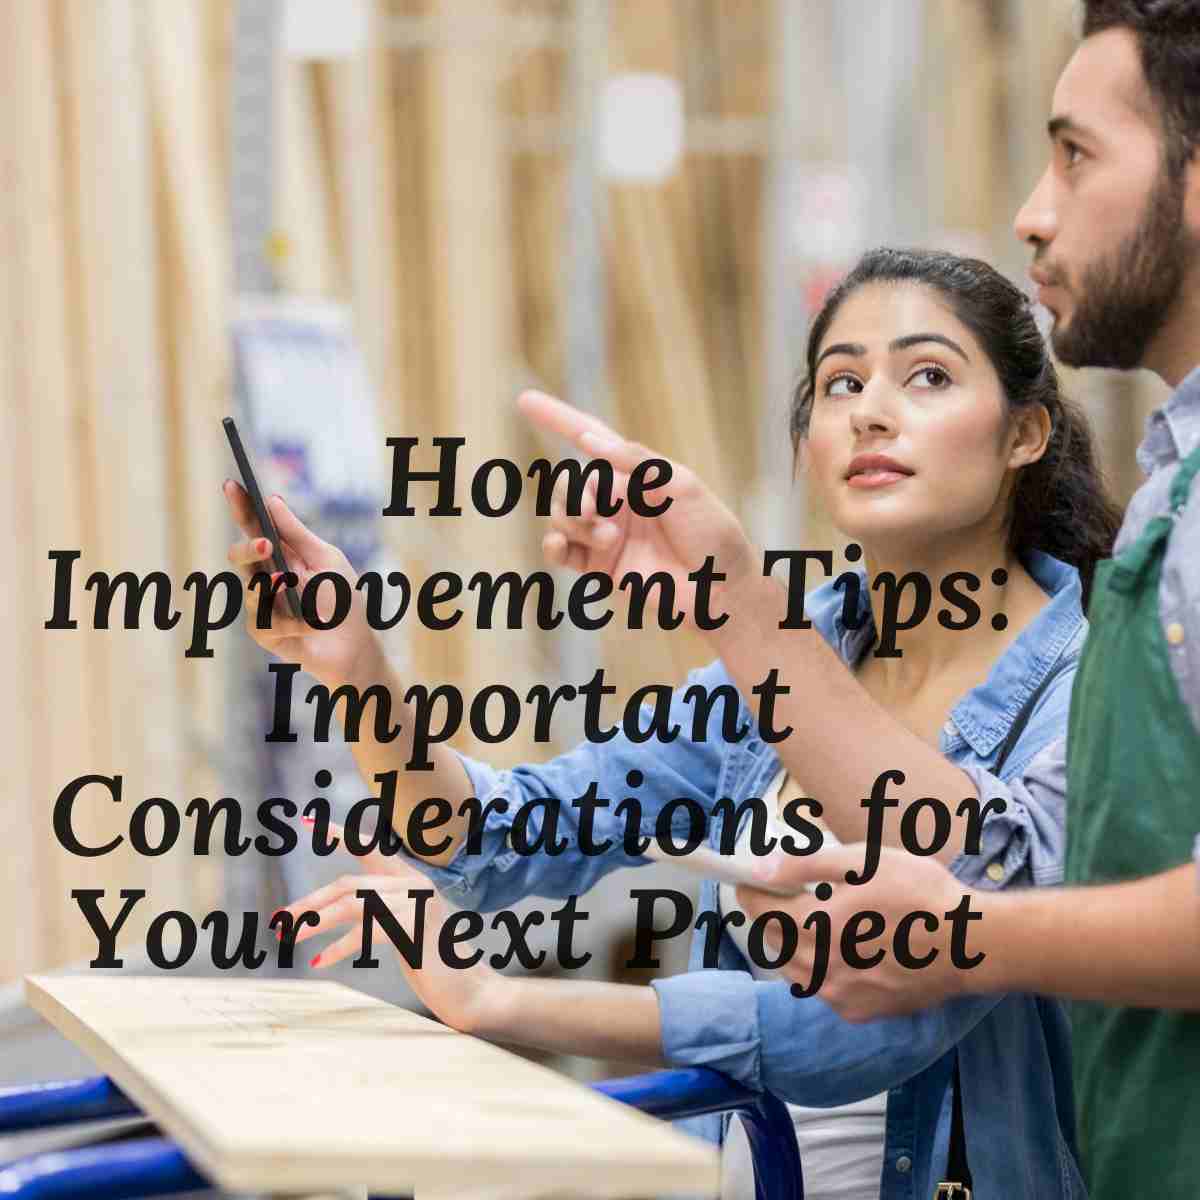 Home Improvement Tips: Important Considerations for Your Next Project